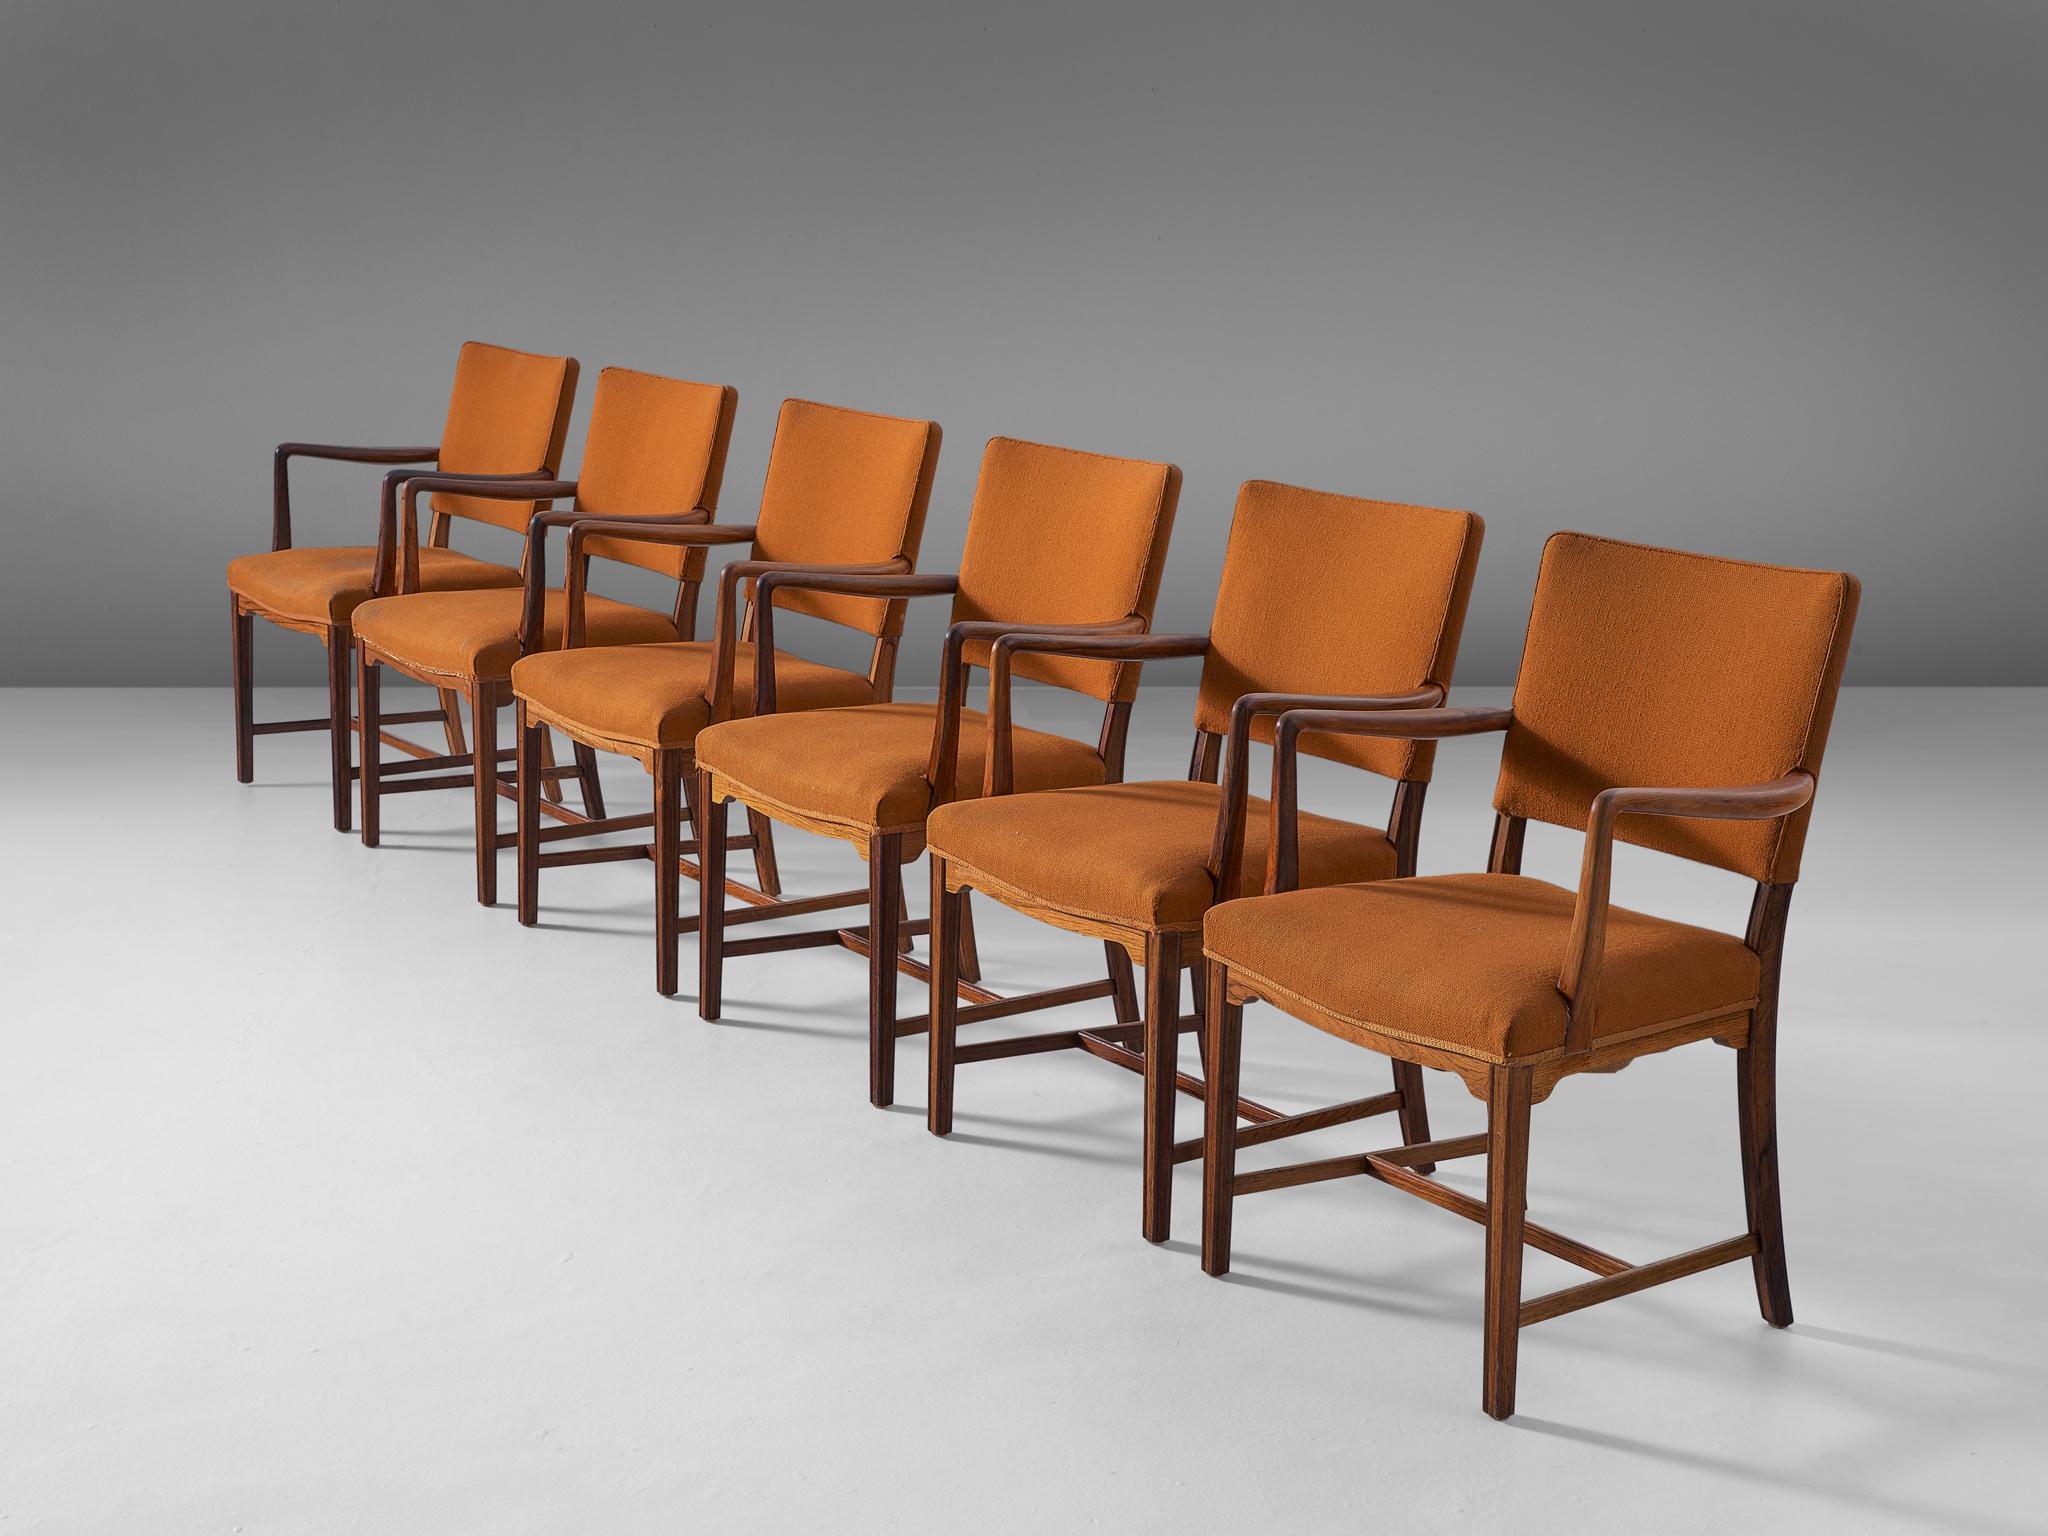 Set of six armchairs, in fabric and rosewood, Denmark, 1940s.

Set of six elegant dining chairs in rosewood and orange fabric upholstery. These chairs show a combination of classical 18th century chairs with Danish modern. The characteristics of Ole